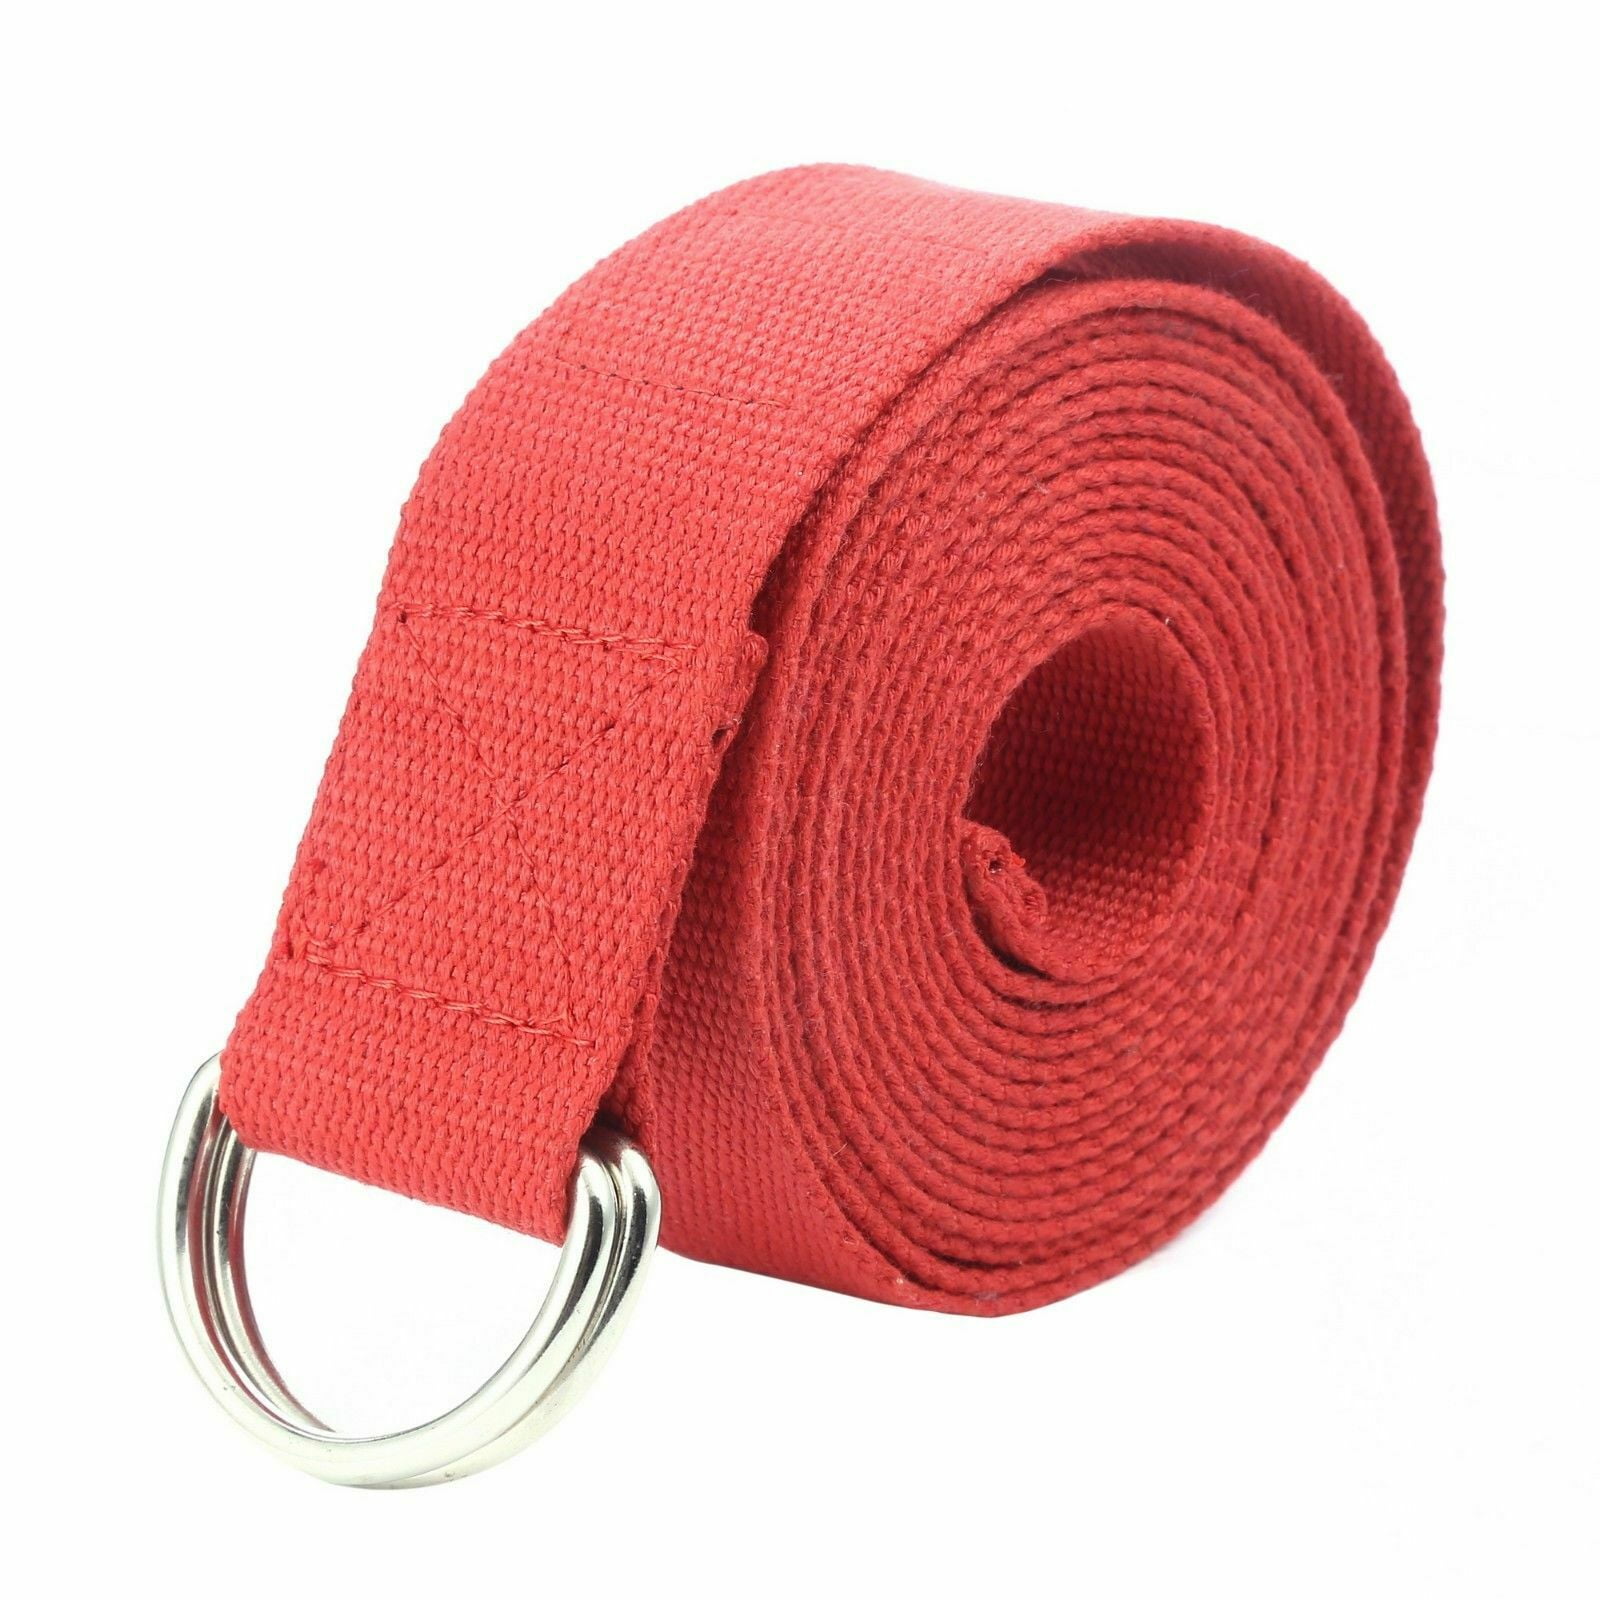 125 Inch/10.5 Feet/3.2M Fitness Exercise Yoga Strap Durable Cotton Metal D-Ring 